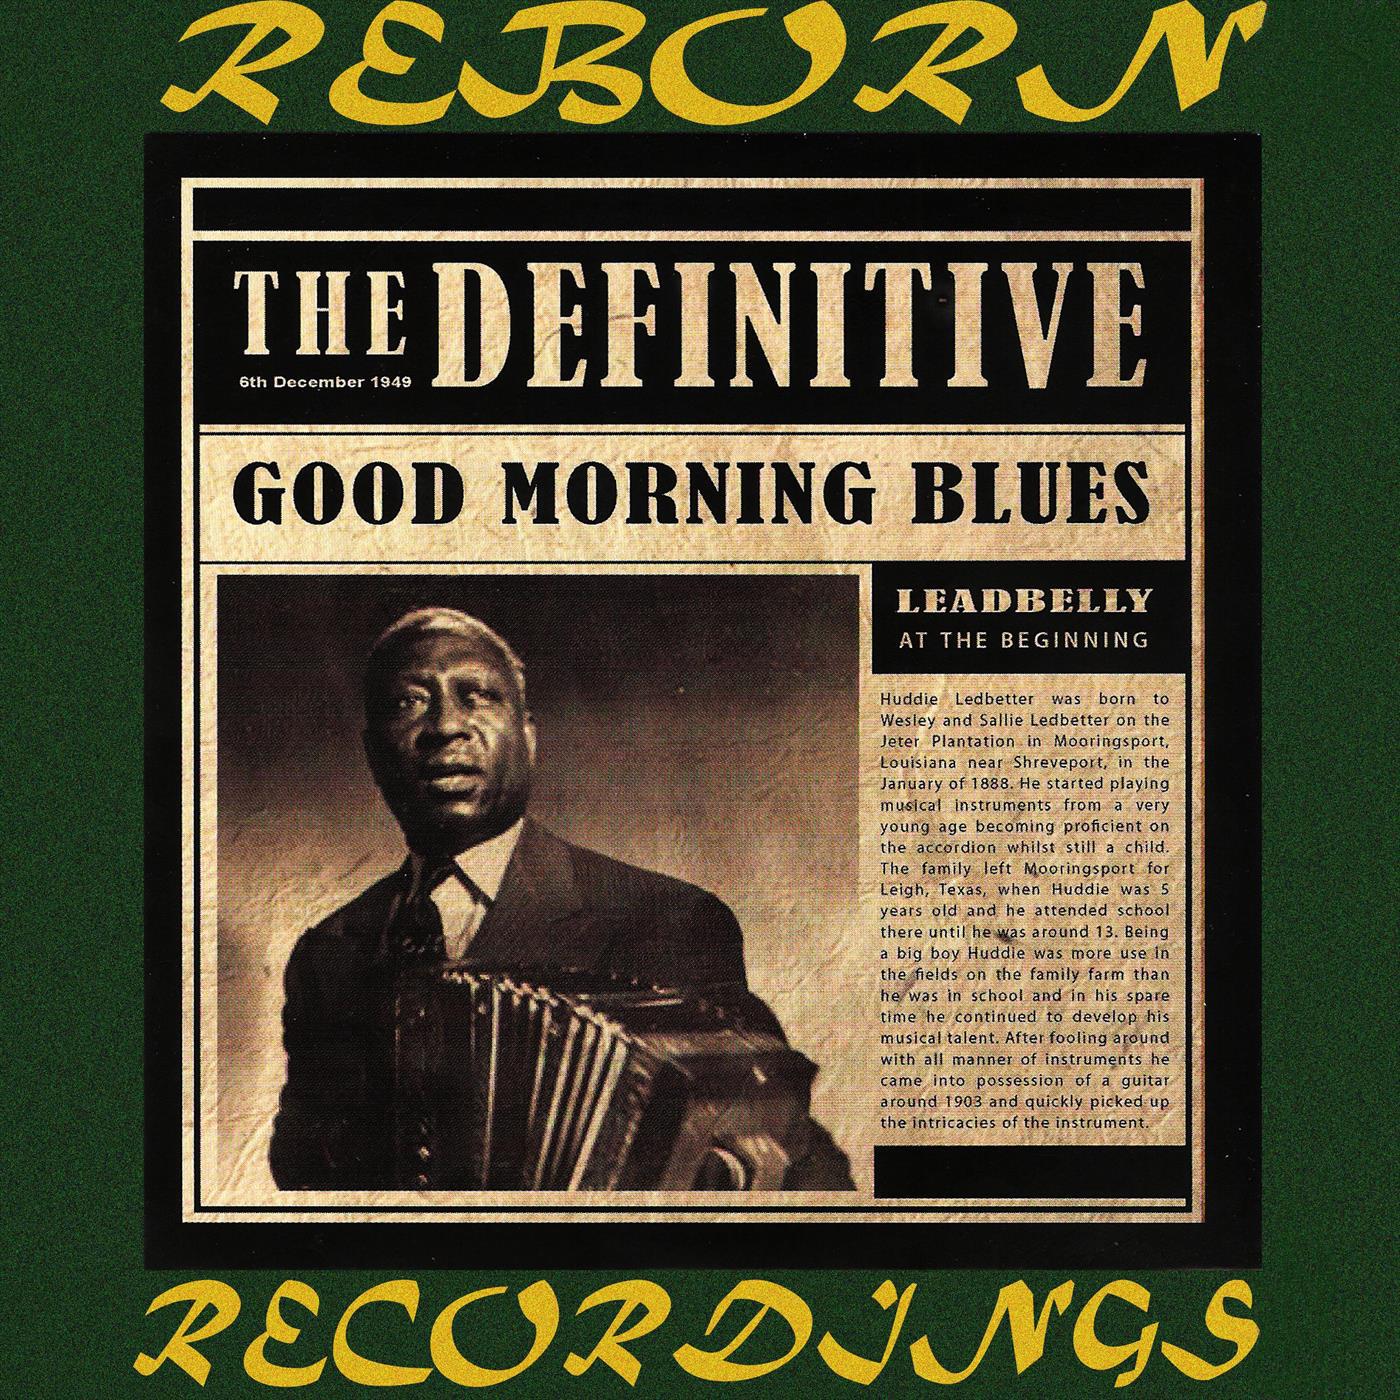 The Definitive Leadbelly, Good Morning Blues - 6th Anniversary Edition (HD Remastered)